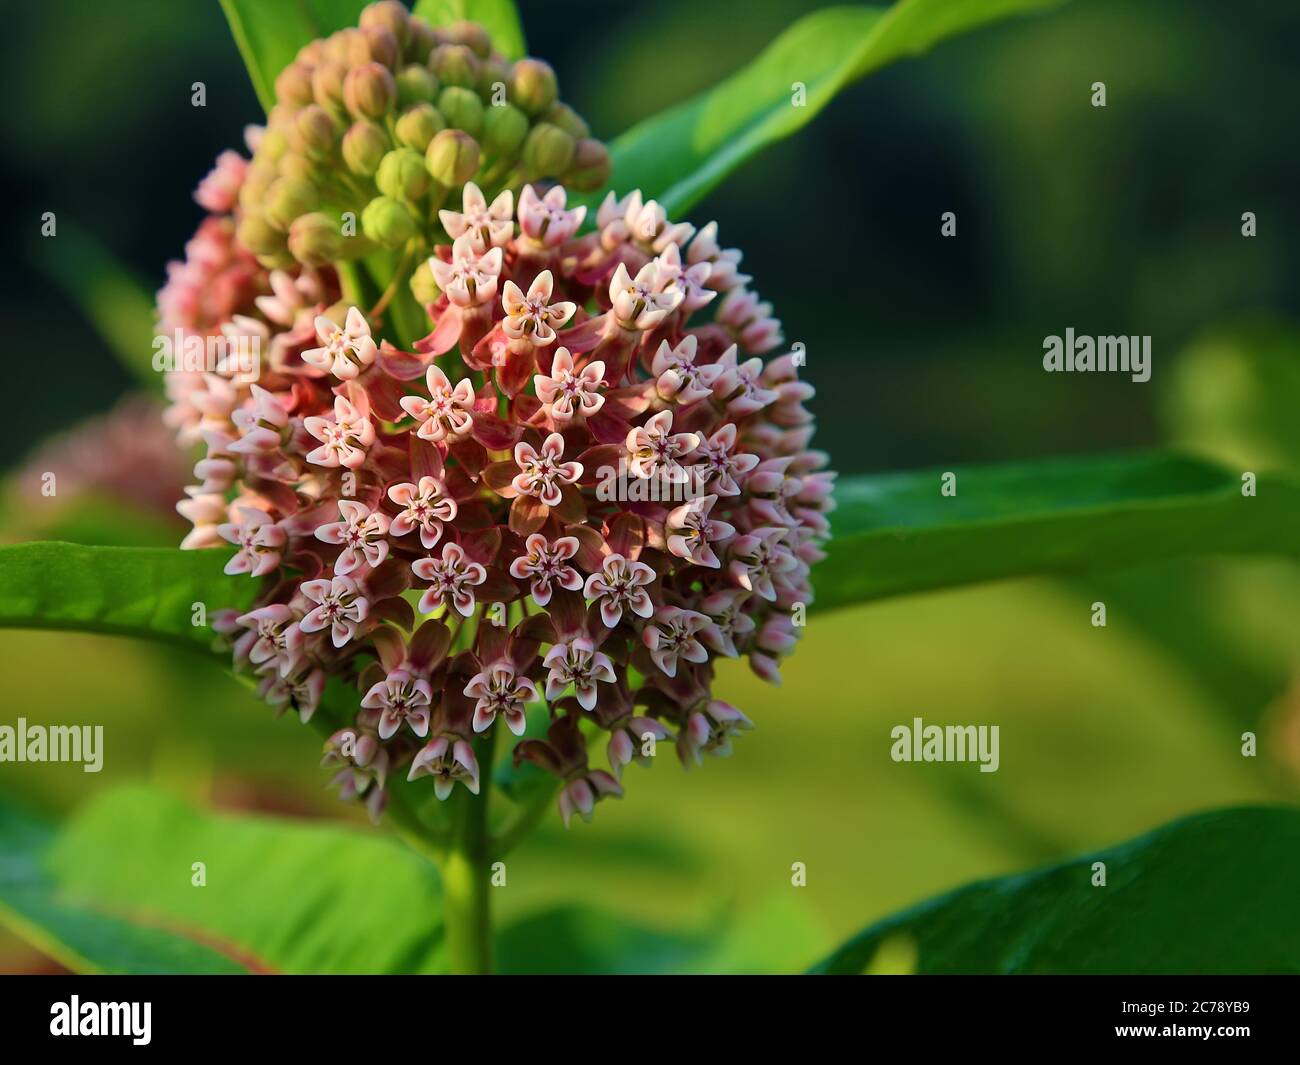 Inflorescence of wild Onion round on a blurred background Stock Photo